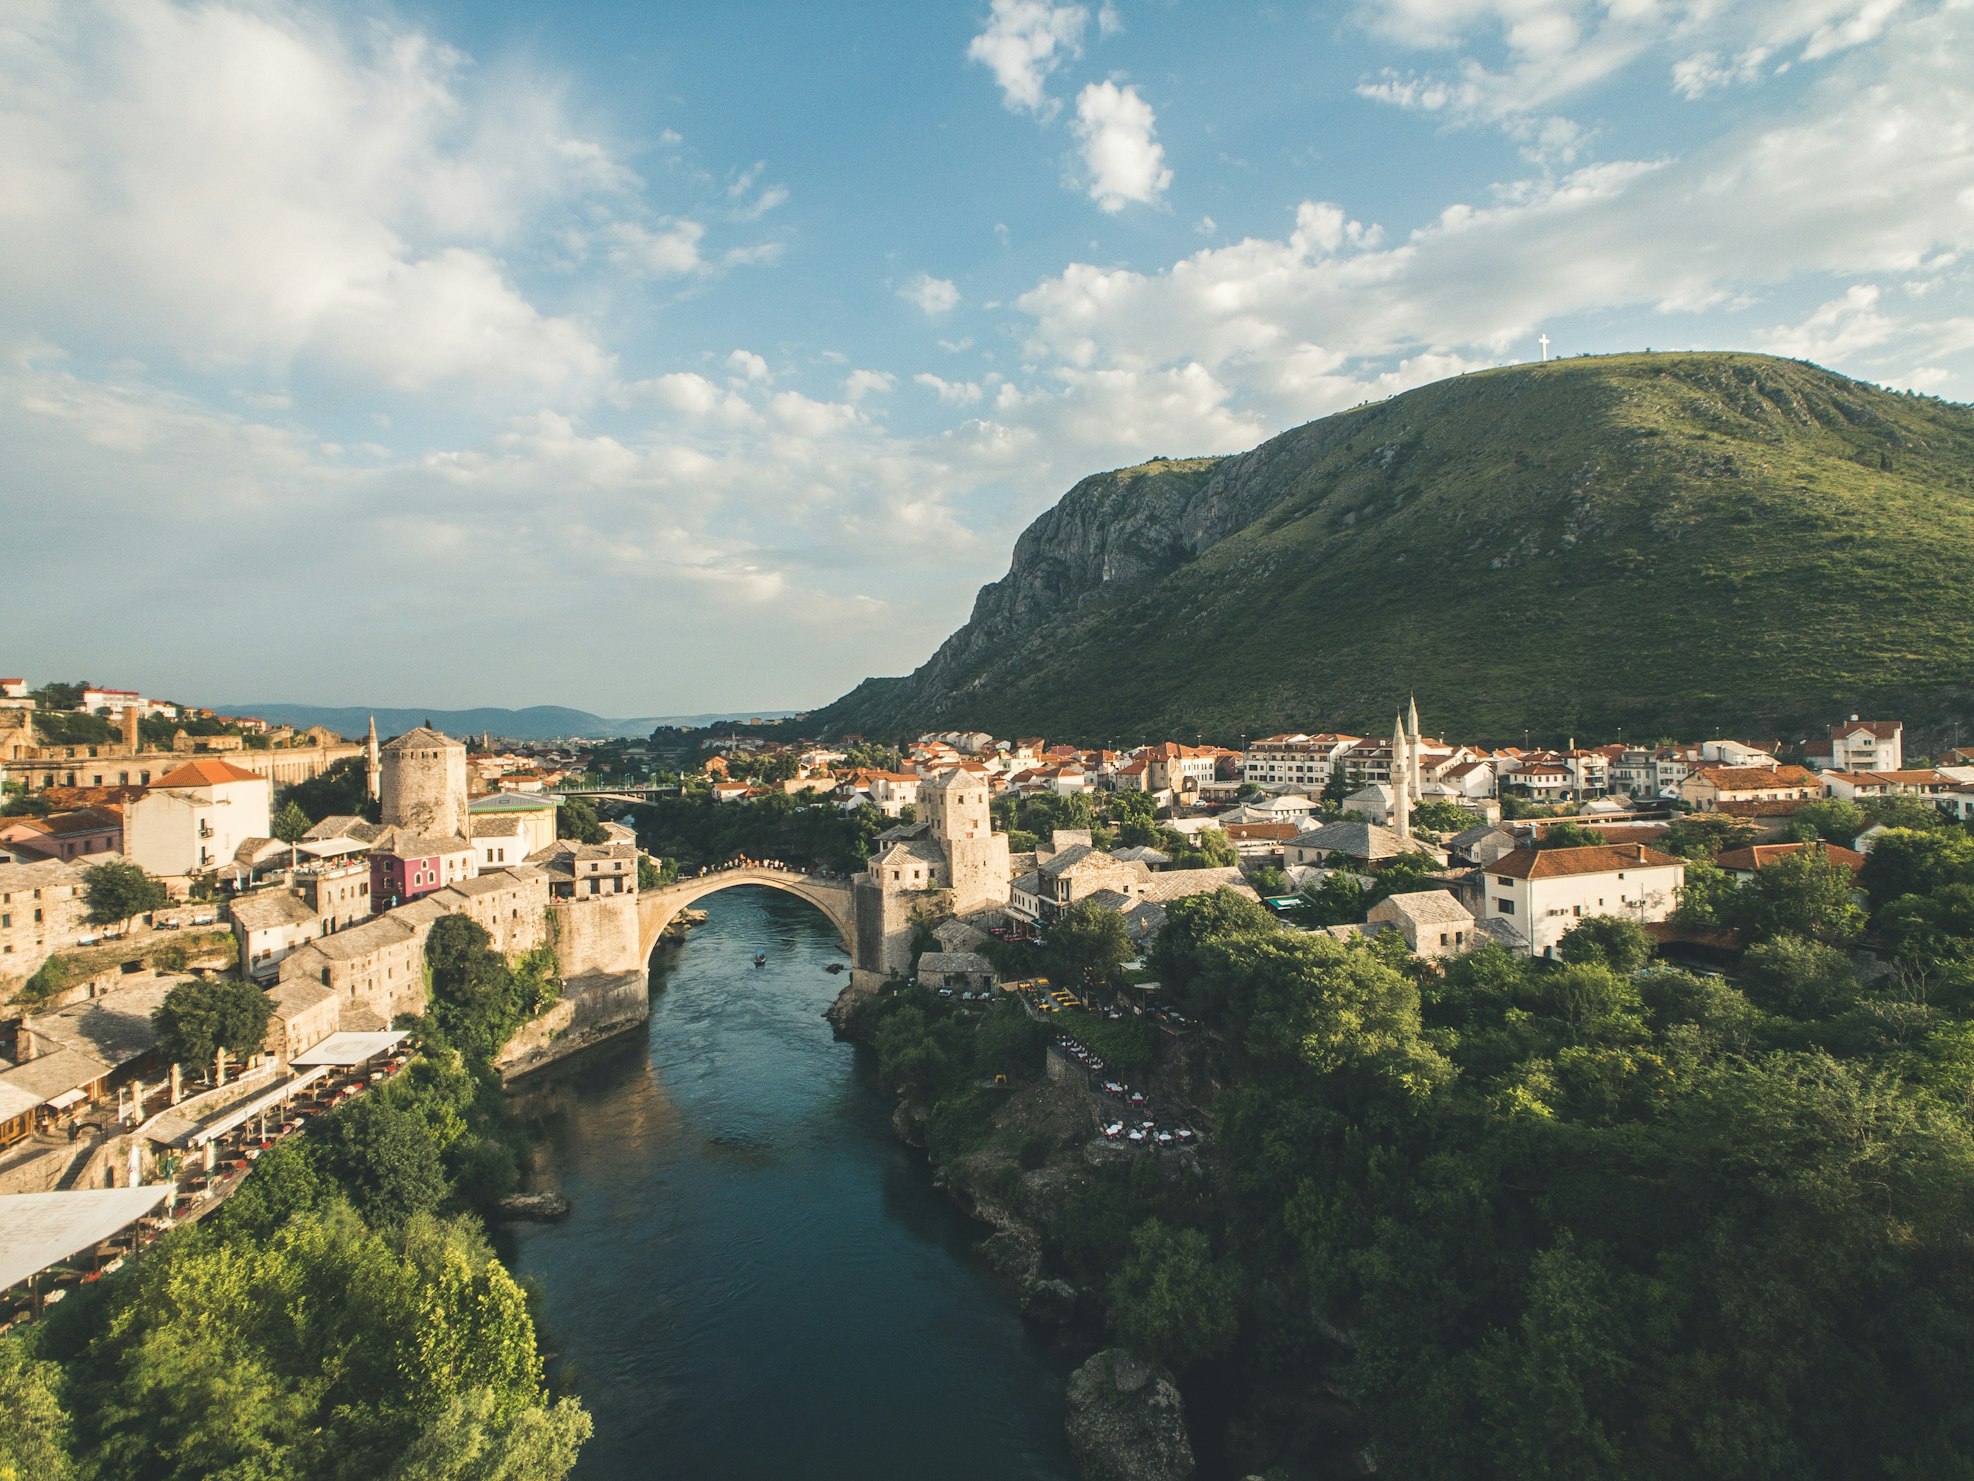 Bosnia and Herzegovina Travel Guide - Attractions, What to See, Do, Costs, FAQs